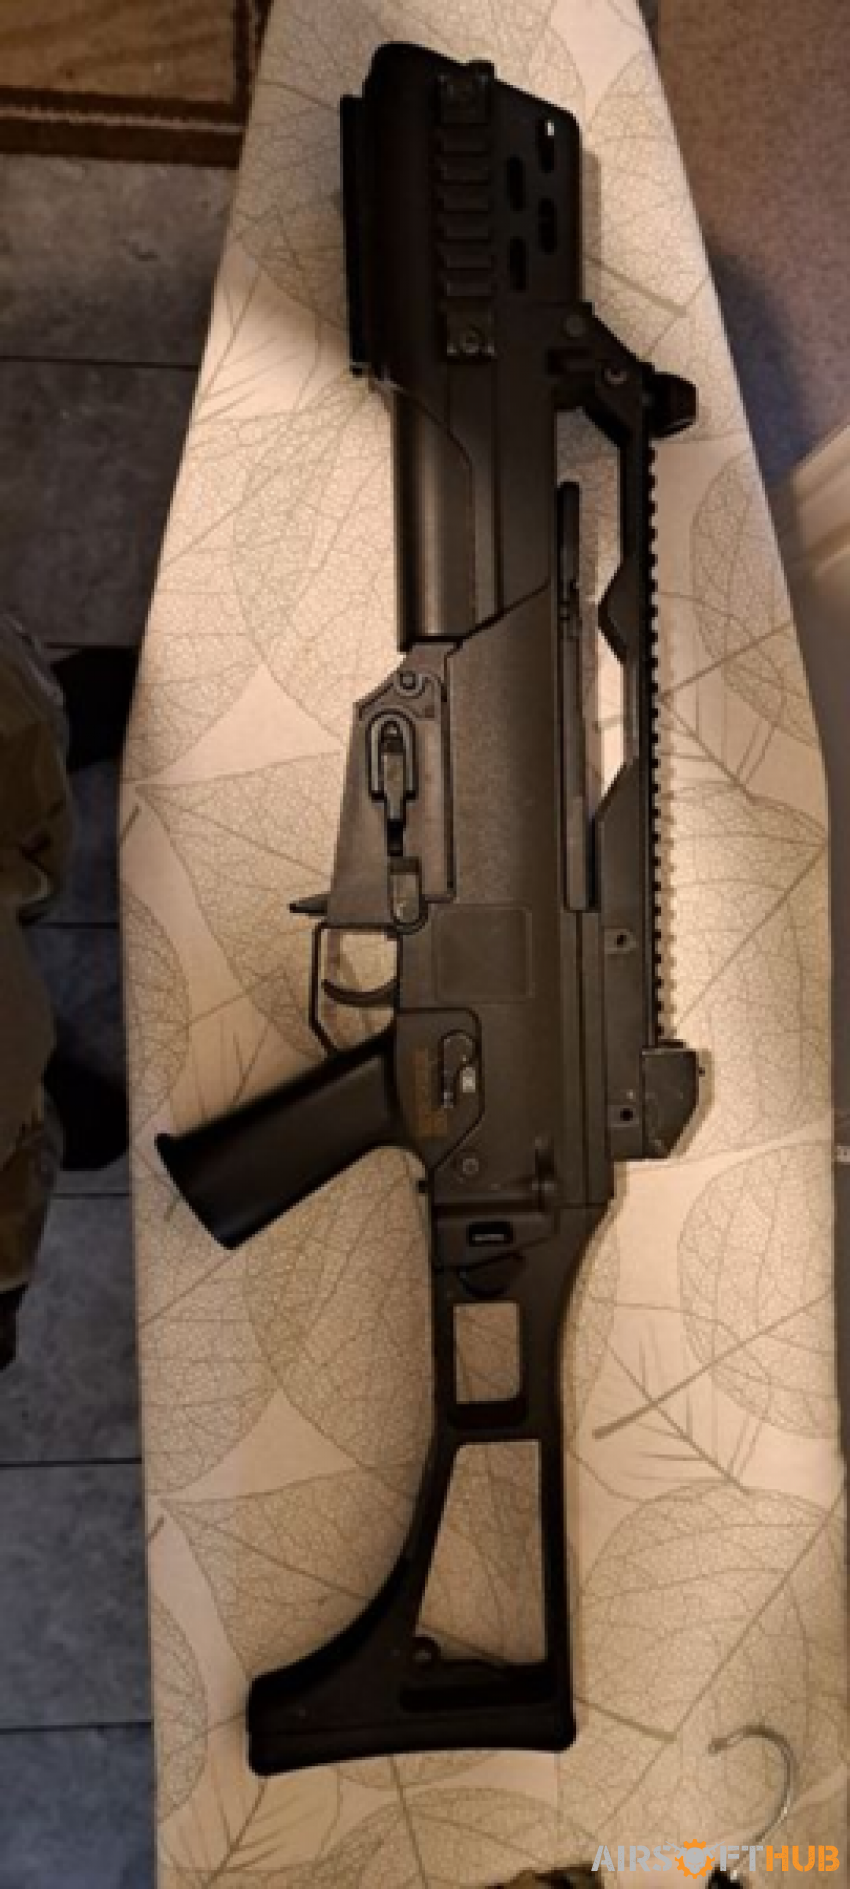 G36c for sale - Used airsoft equipment